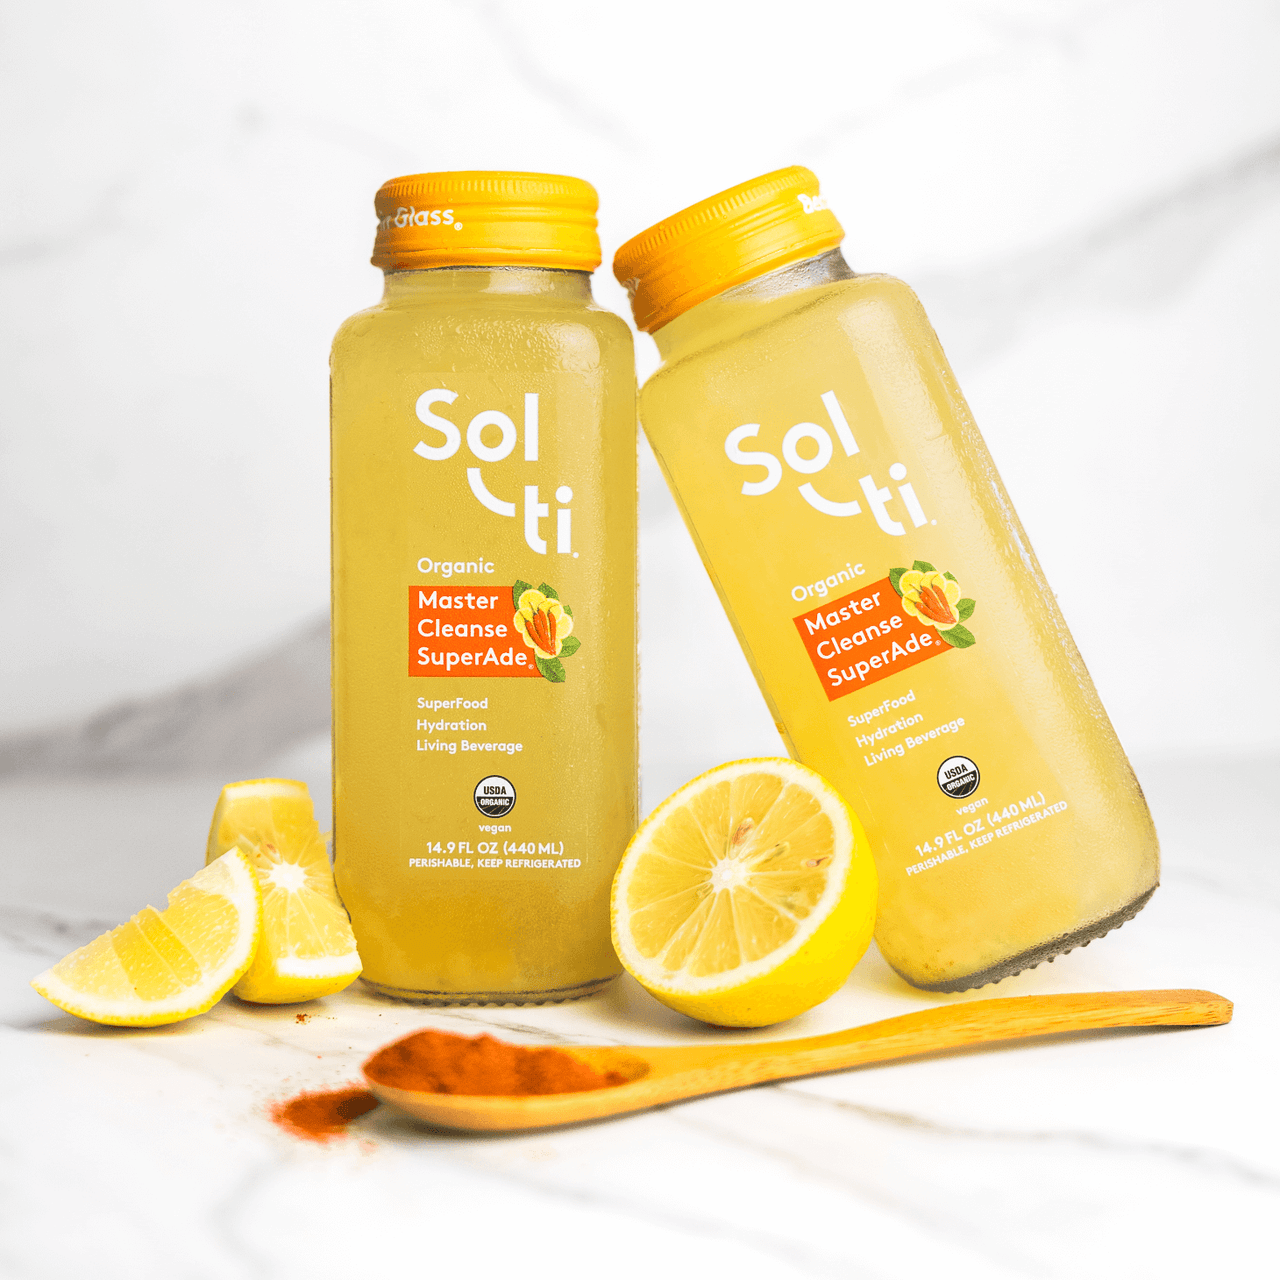 two Master Cleanse SuperAde bottles next to a spoon with cayenne and lemon slices